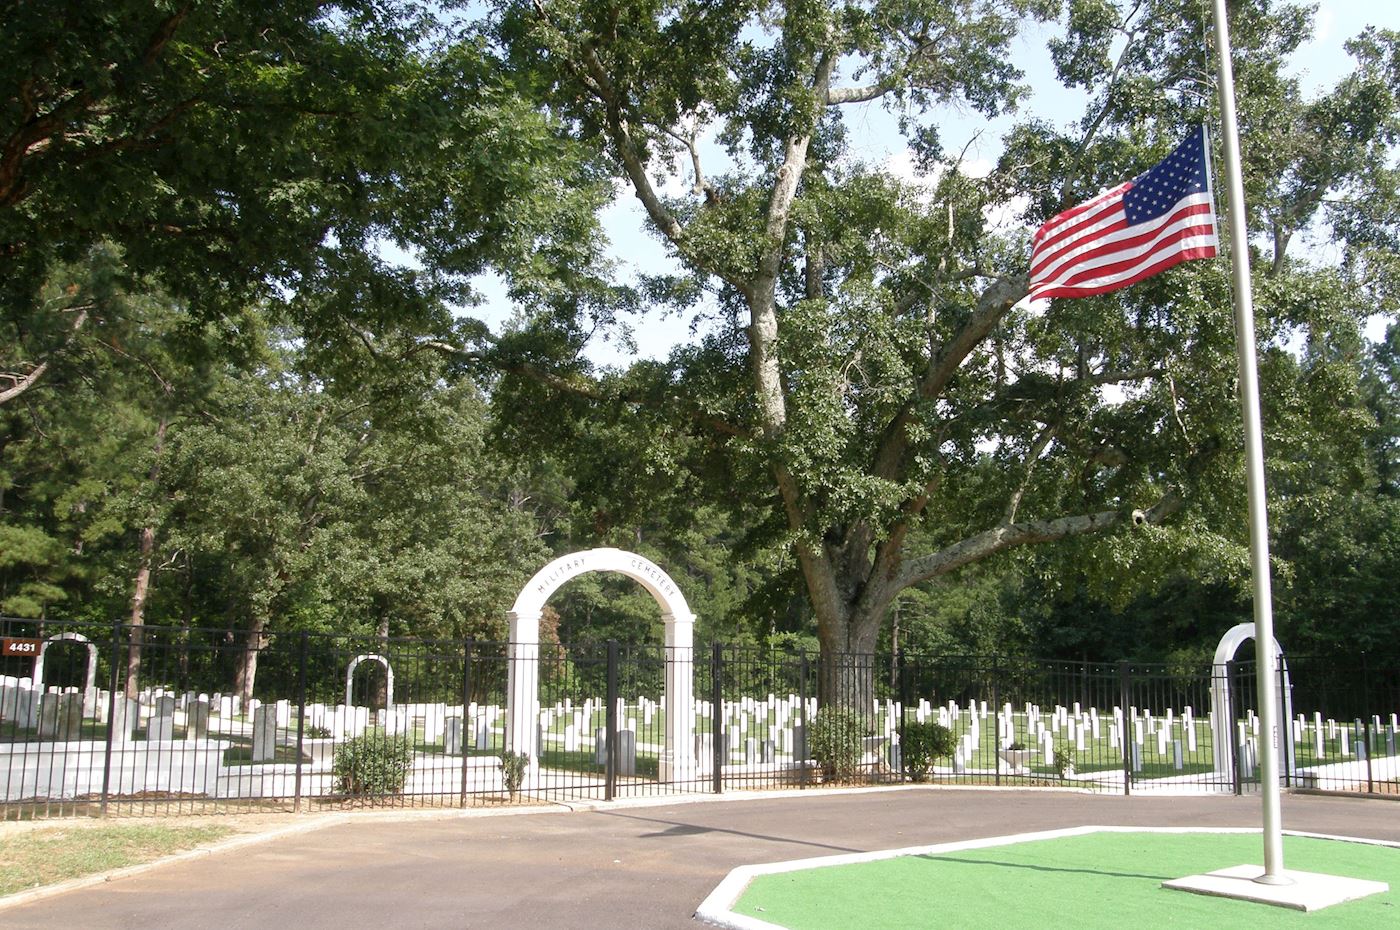 The Fort McClellan, Ala., Military Cemetery is on Goode Road in a quiet, peaceful location that is easily accessible to the public.